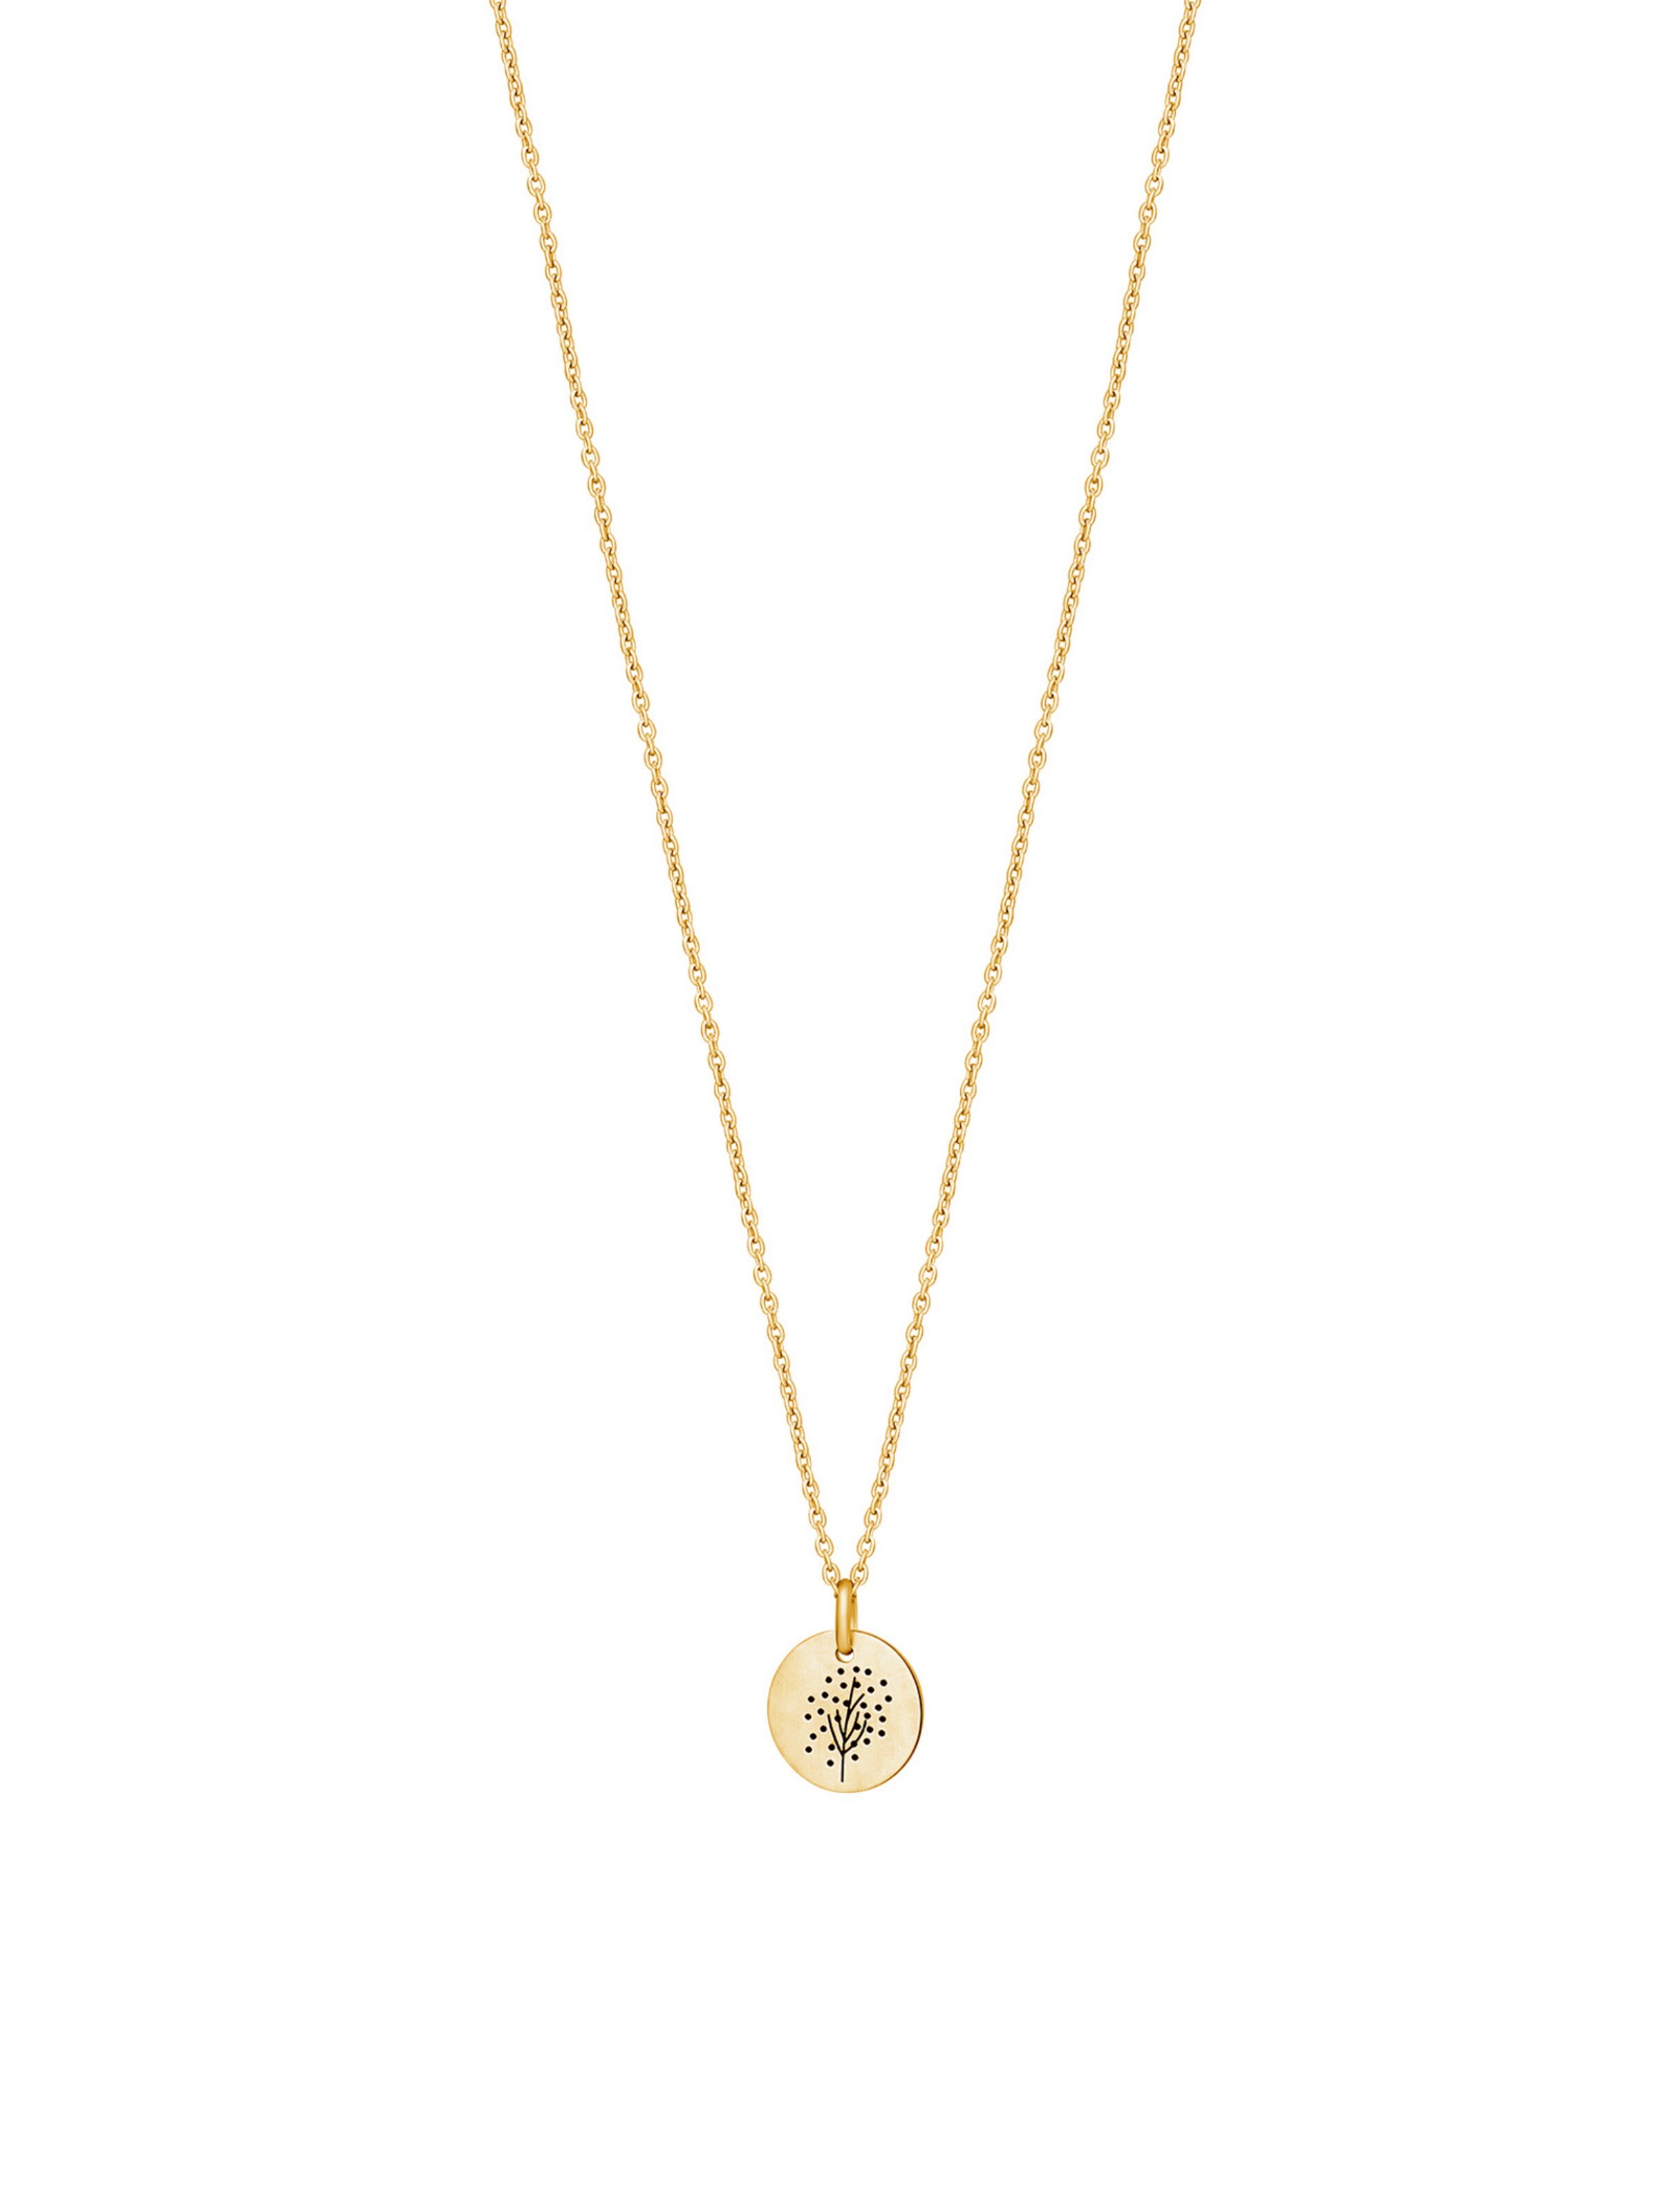 Nordahl Jewellery Kette Life52 in Gold 